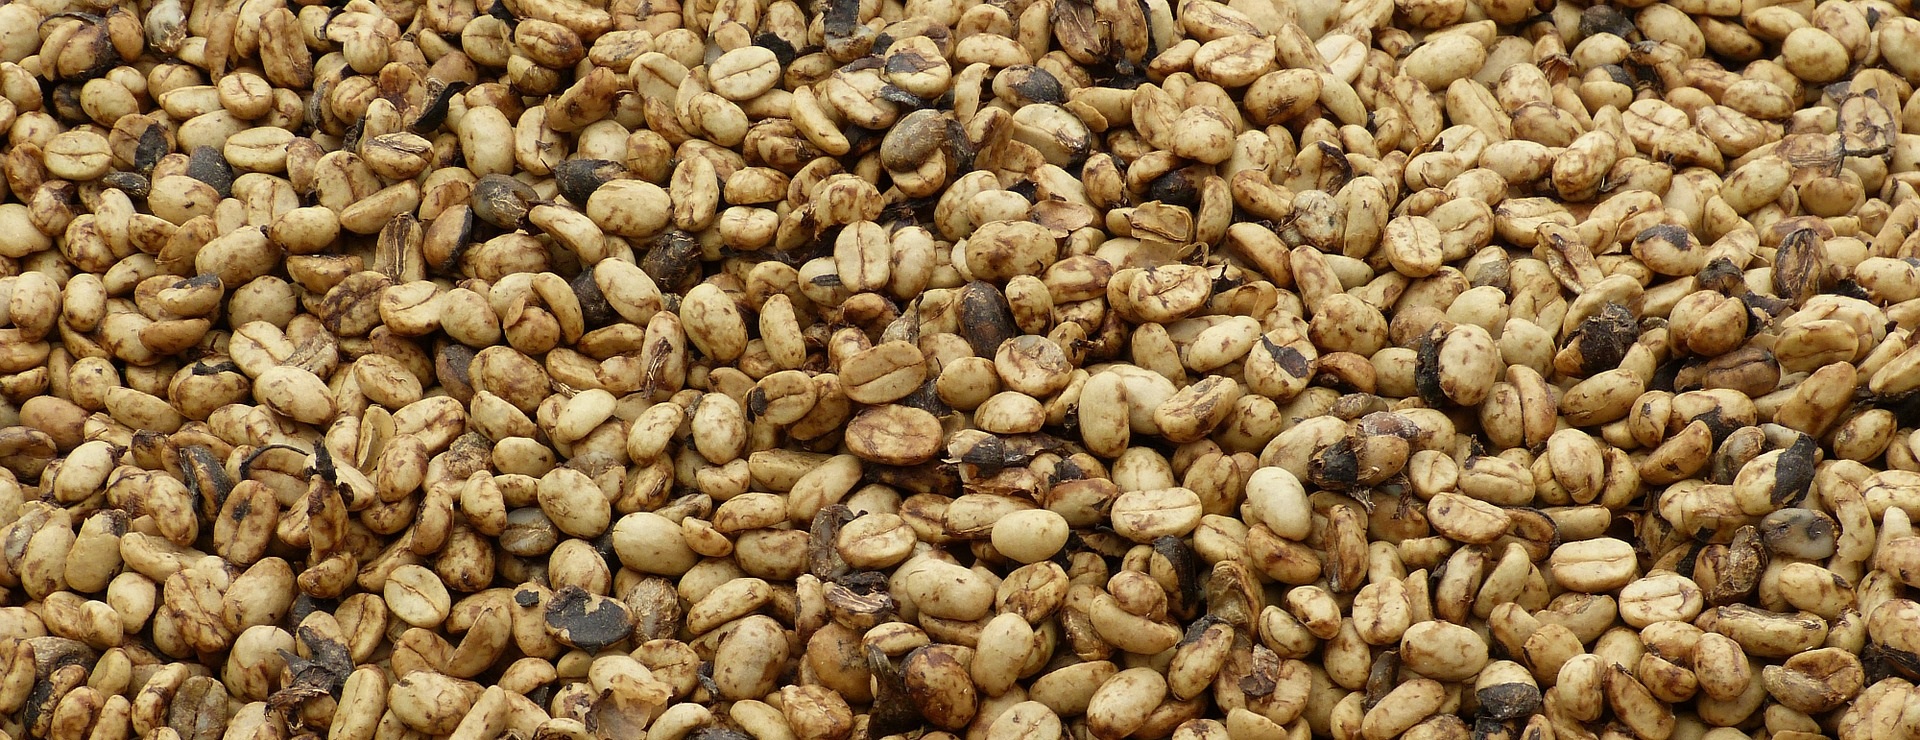 coffee cultivation: Natural processing coffee beans - Bunaa